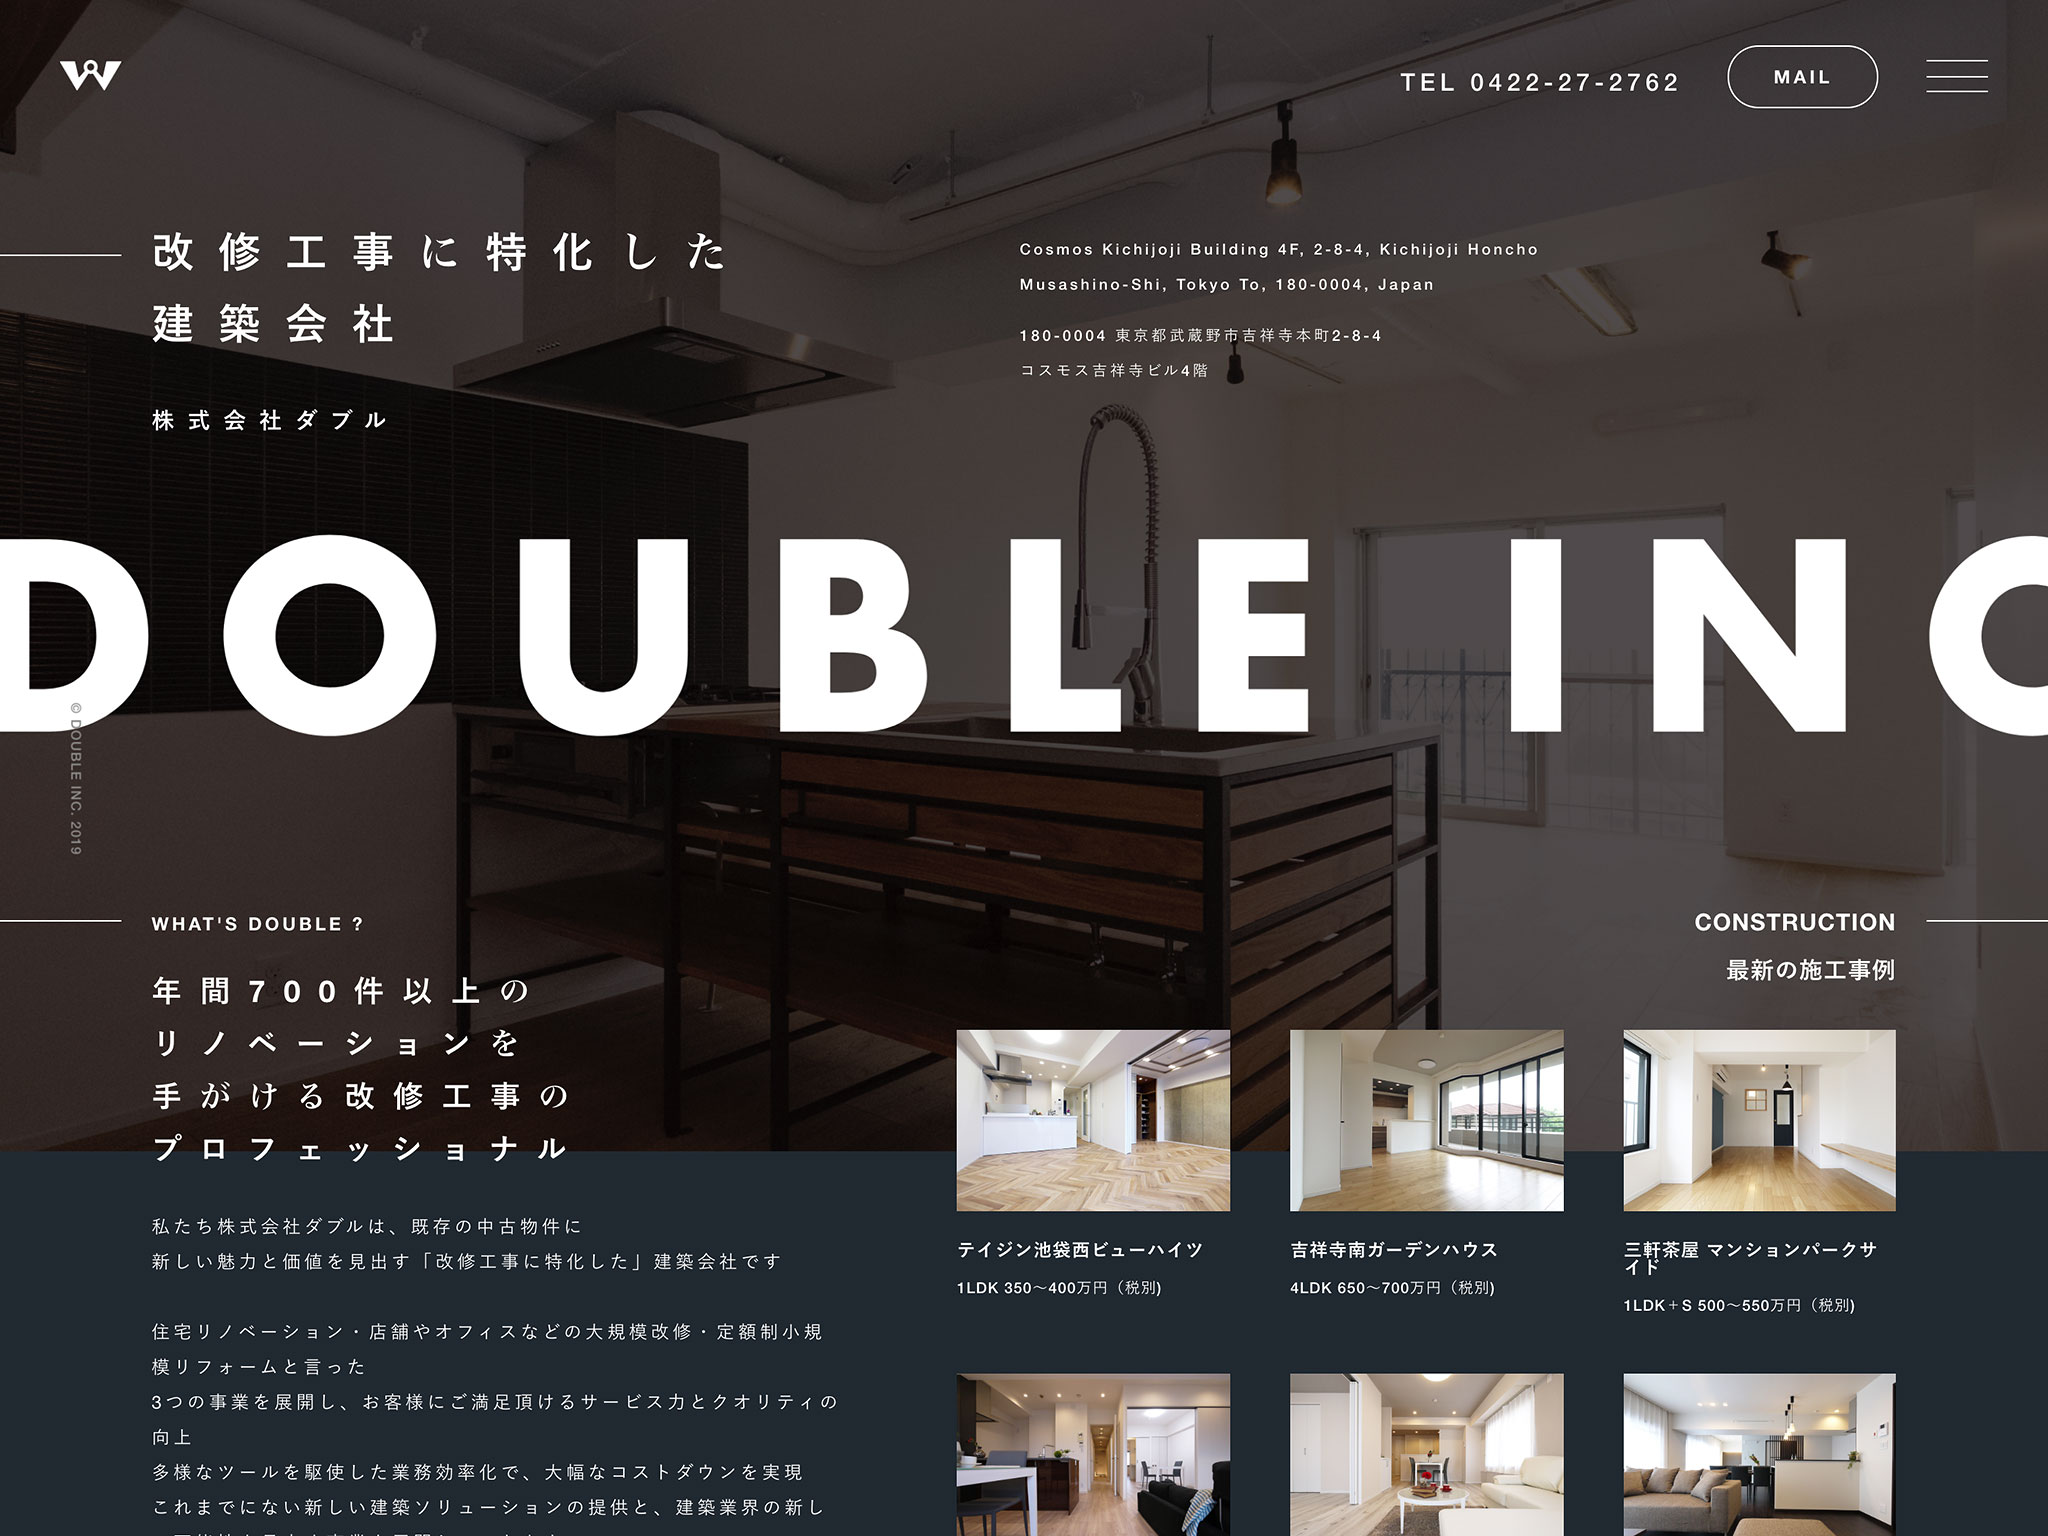 DOUBLE INC.（株式会社ダブル）｜OFFICIAL WEBSITE